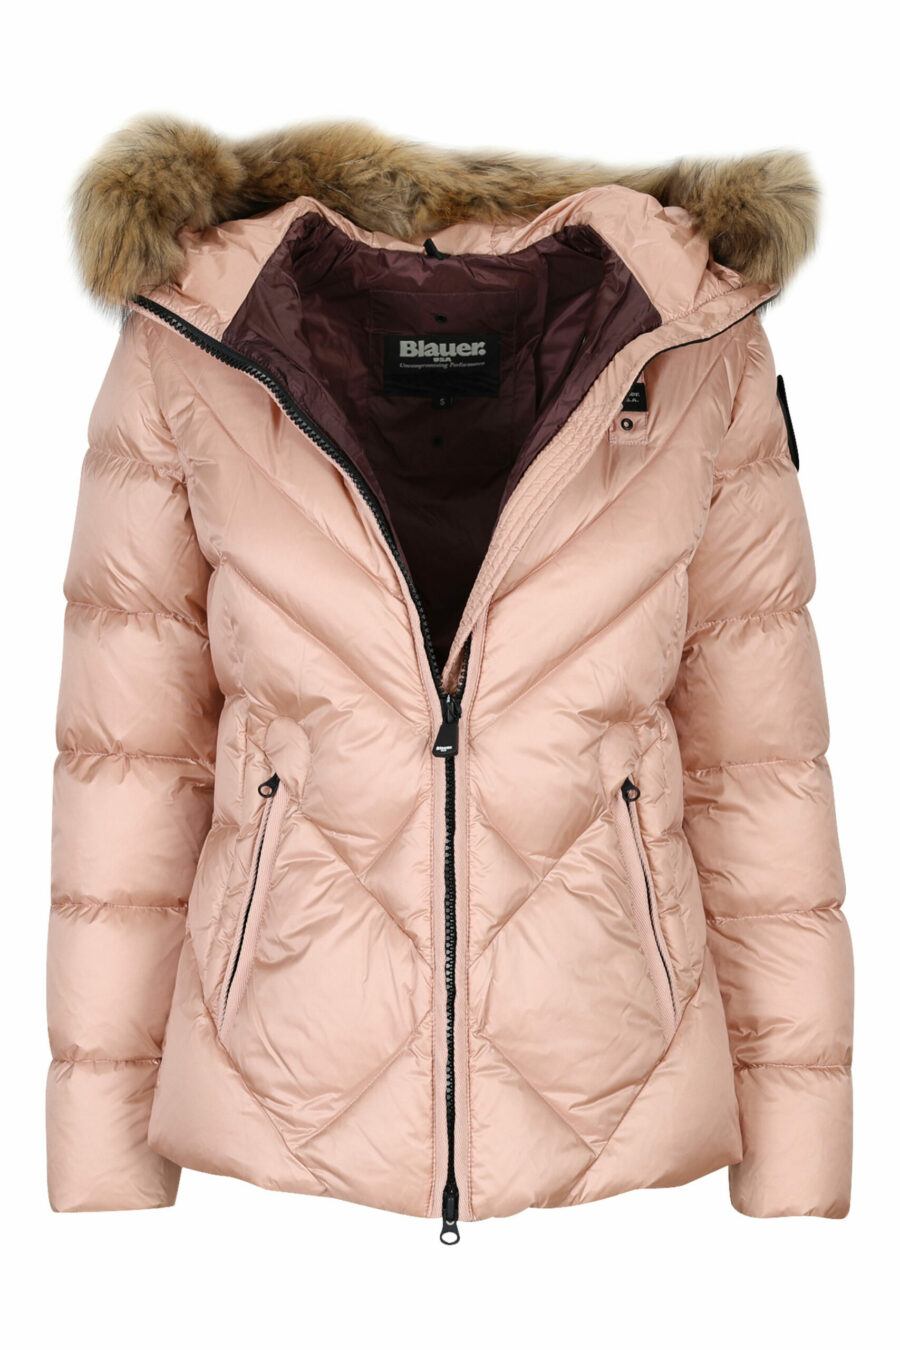 Pale pink hooded jacket with fur hood and diagonal lines and violet lining - 8058610691691 3 scaled